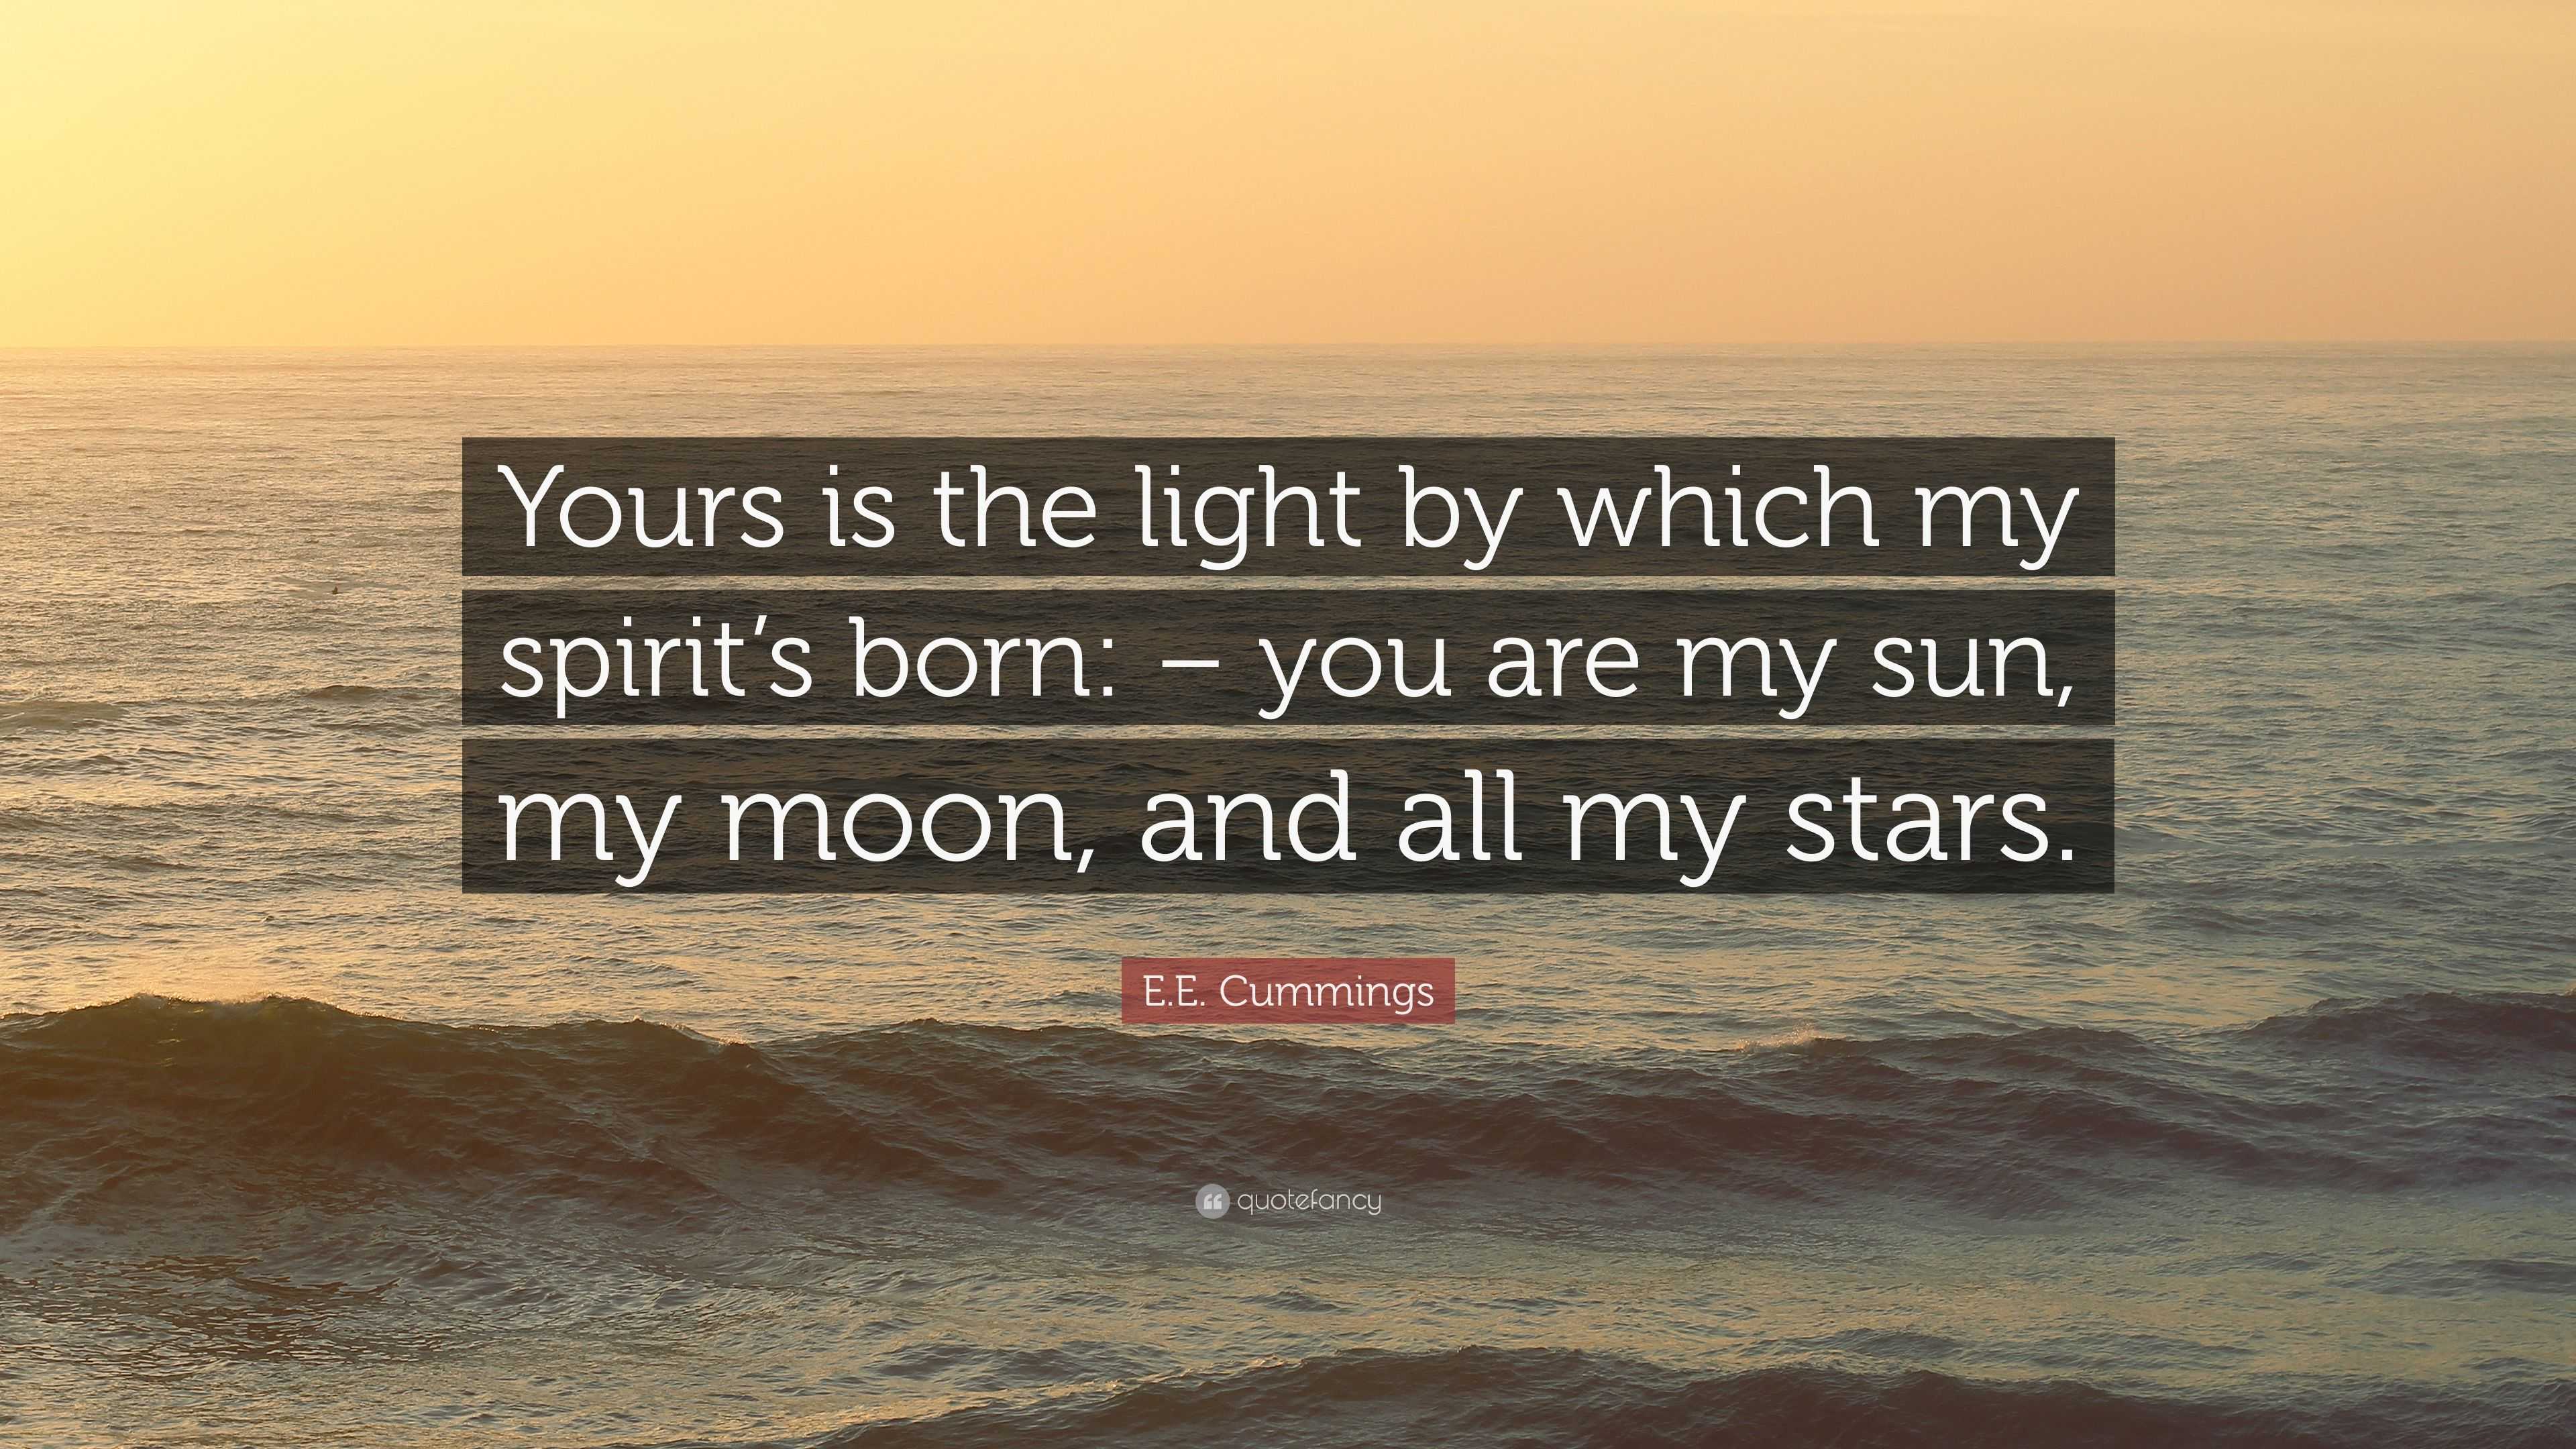 E.E. Cummings Quote: “Yours is the light by which my spirit’s born: – you are my ...